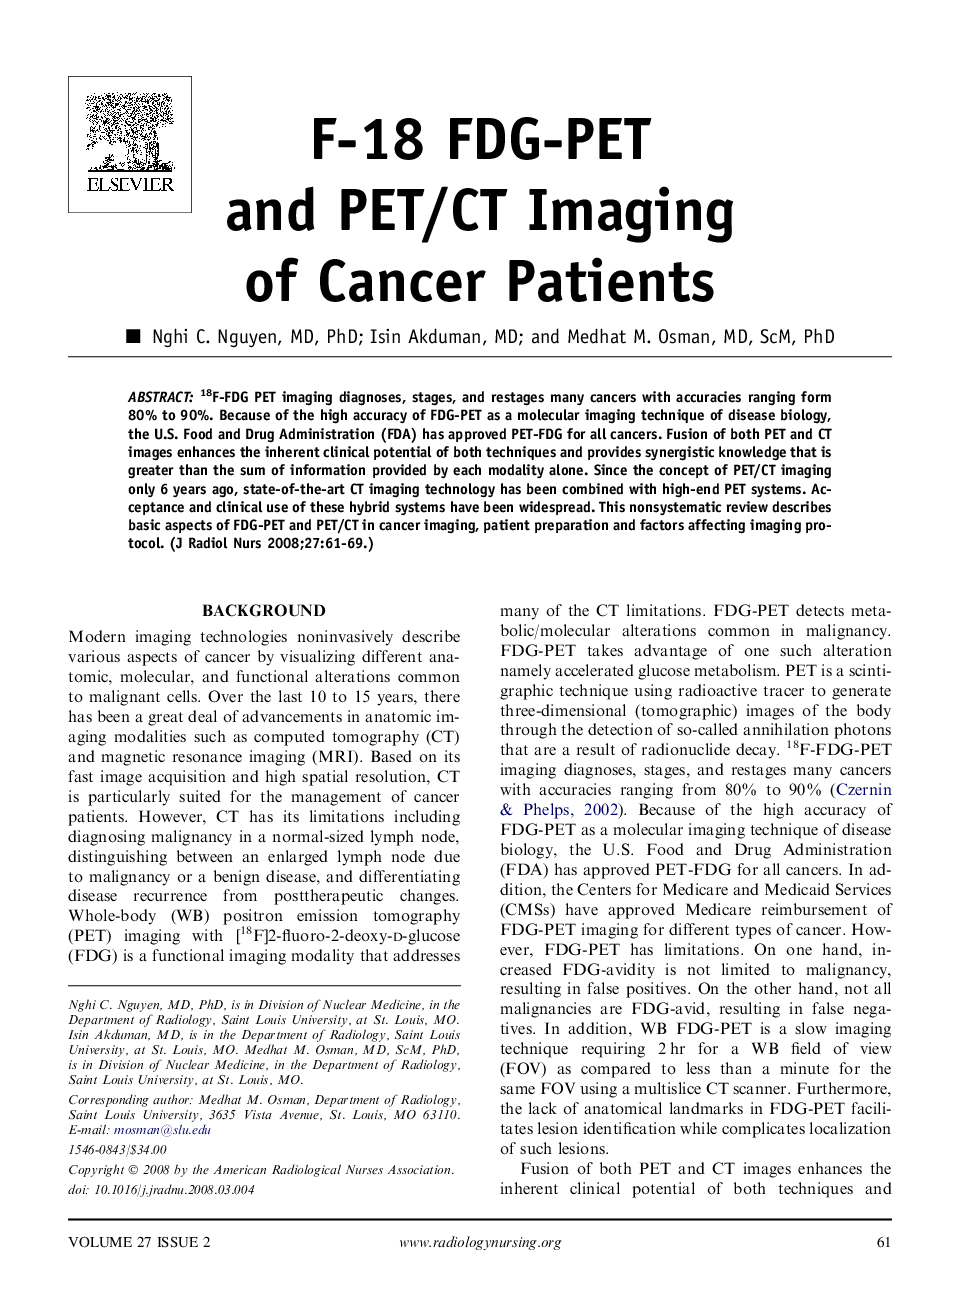 F-18 FDG-PET and PET/CT Imaging of Cancer Patients